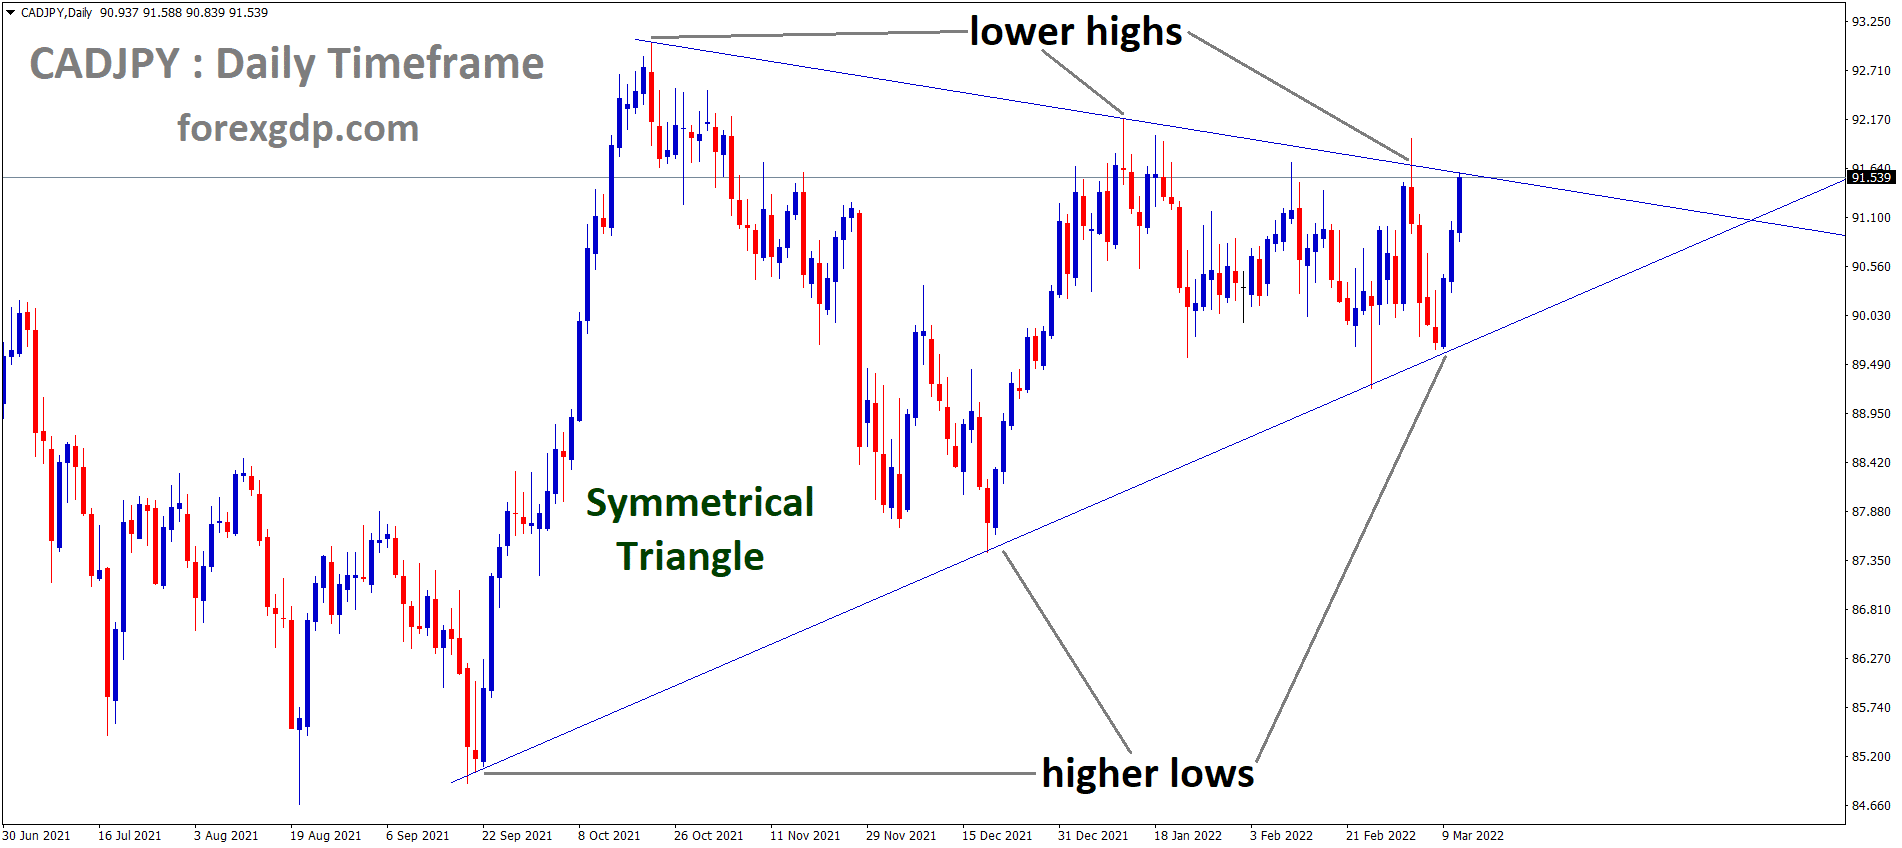 CADJPY is moving in the Symmetrical triangle pattern and the market has reached the top area of the pattern